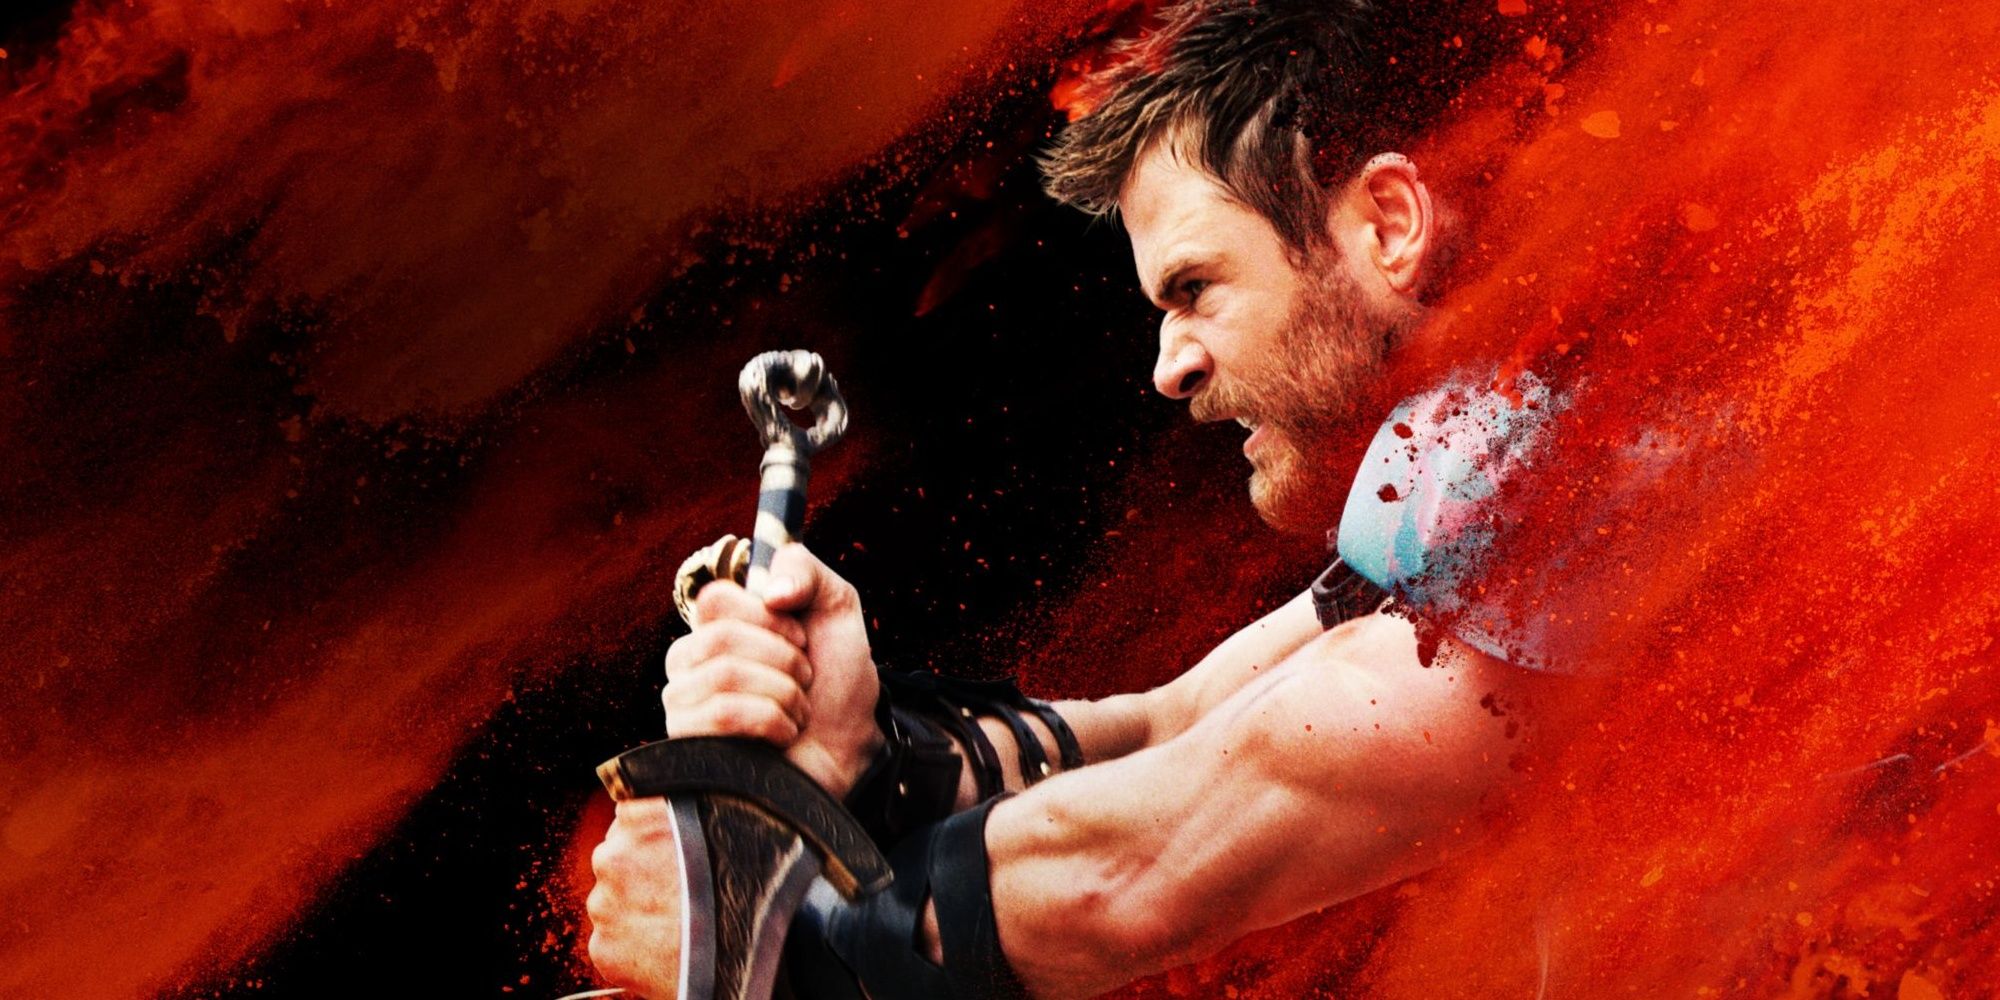 Chris Hemsworth as Thor in a promo poster for Thor: Ragnarok